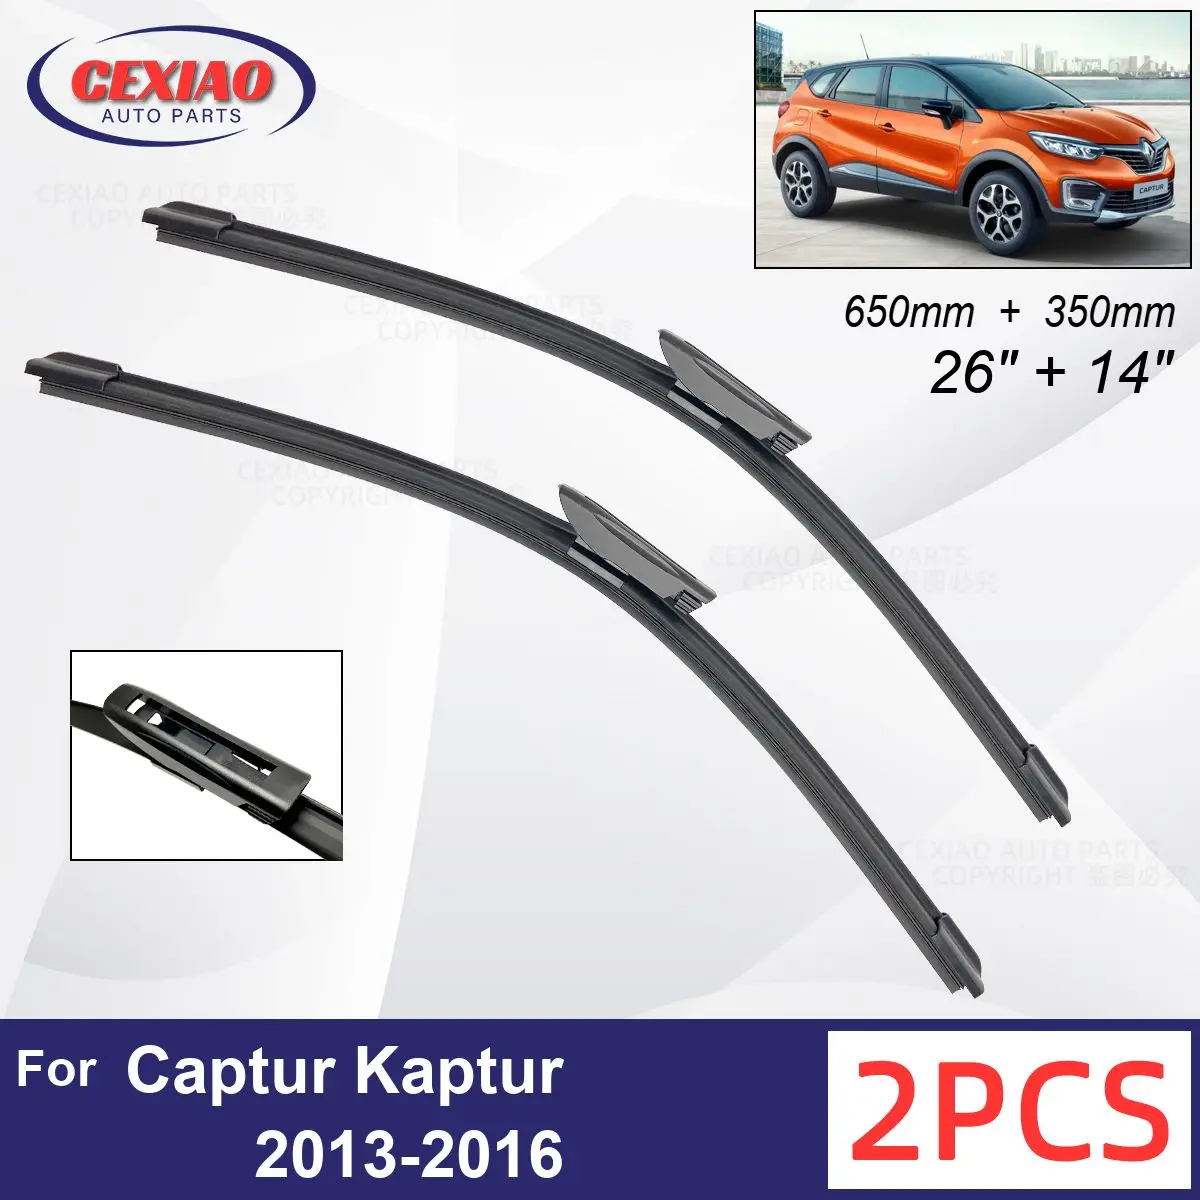 

Car Wiper For Renault Captur Kaptur 2013-2016 Front Wiper Blades Soft Rubber Windscreen Wipers Auto Windshield 650mm 350mm